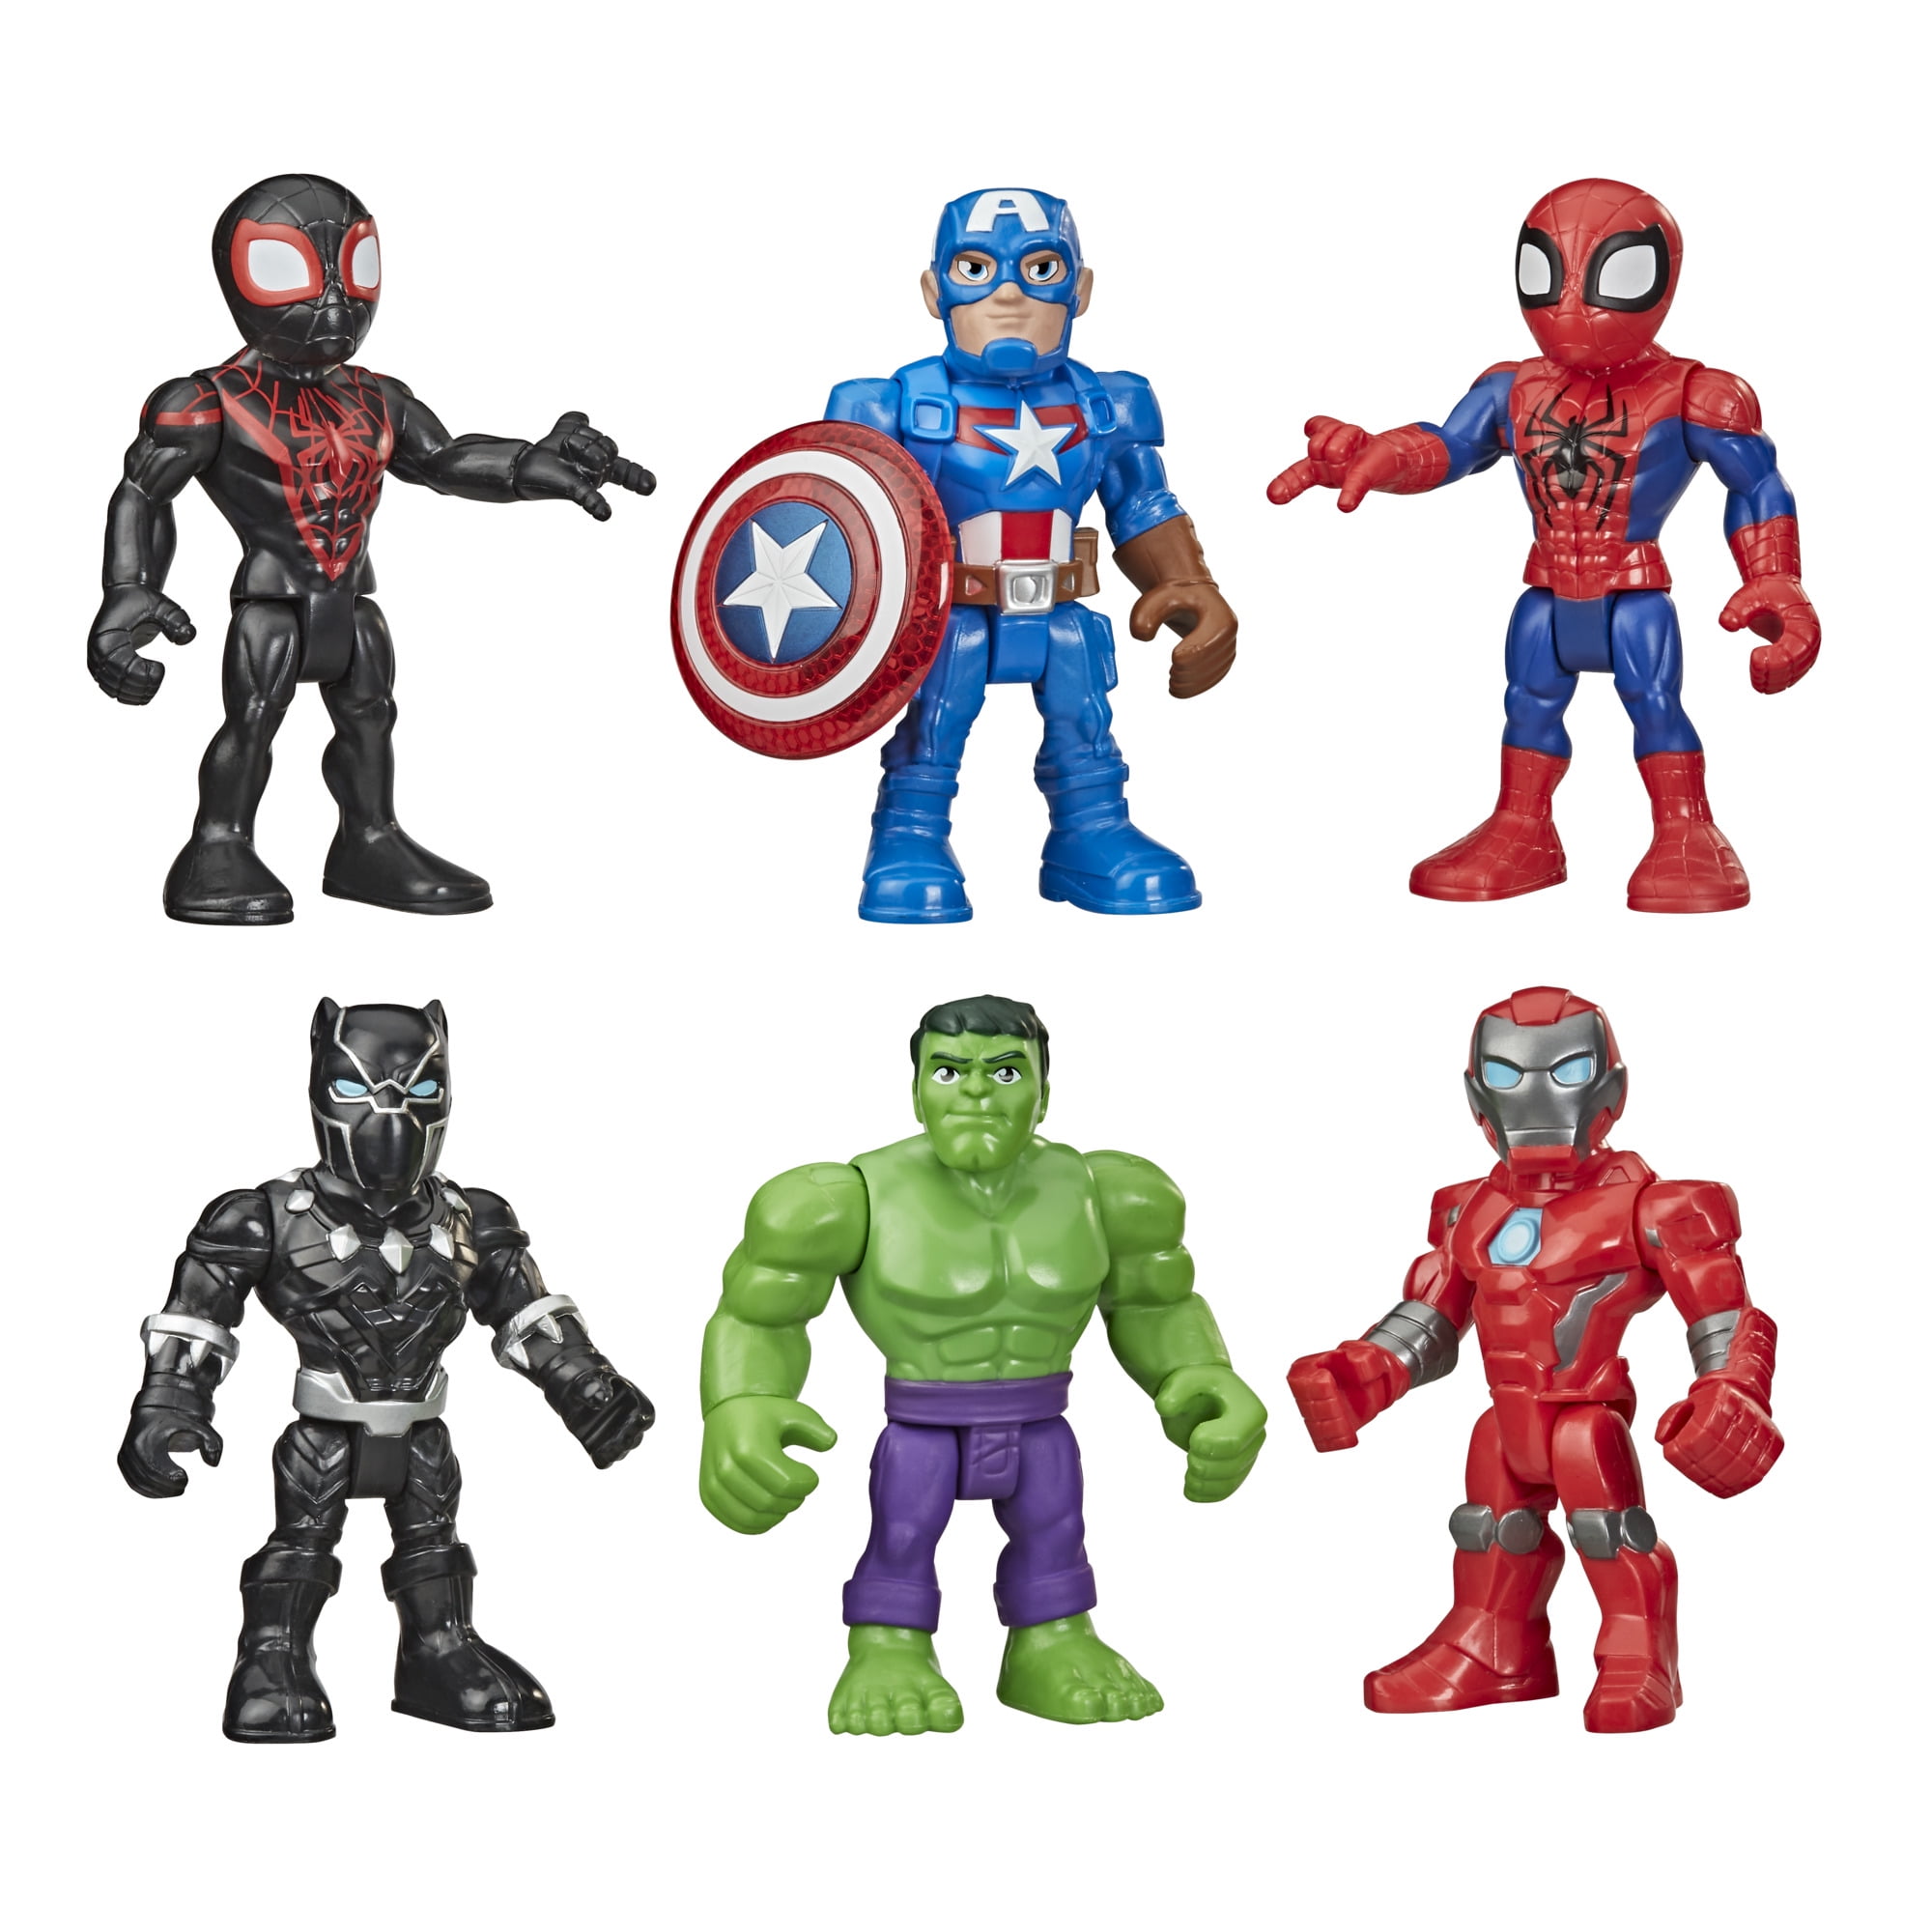 Includes Captain America Ages 3 and Up Super Hero Adventures Playskool Heroes Marvel 5-Inch Action Figure 5-Pack Spider-Man 5 Accessories